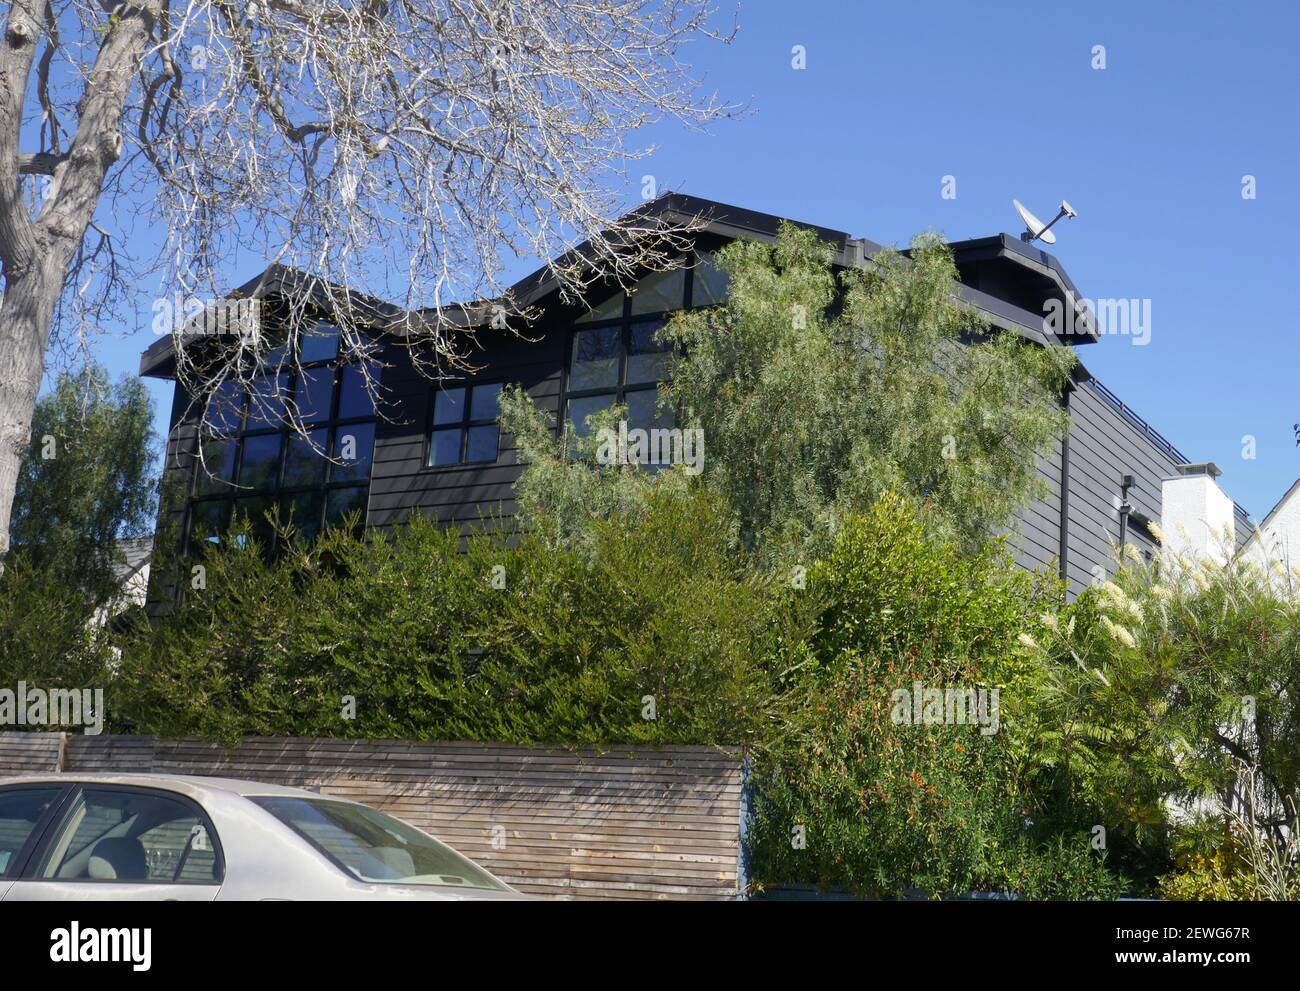 Los Angeles, California, USA 2nd March 2021 A general view of atmosphere of actor Jon Bernthal's home/house on March 2, 2021 in Los Angeles, California, USA. Photo by Barry King/Alamy Stock Photo Stock Photo